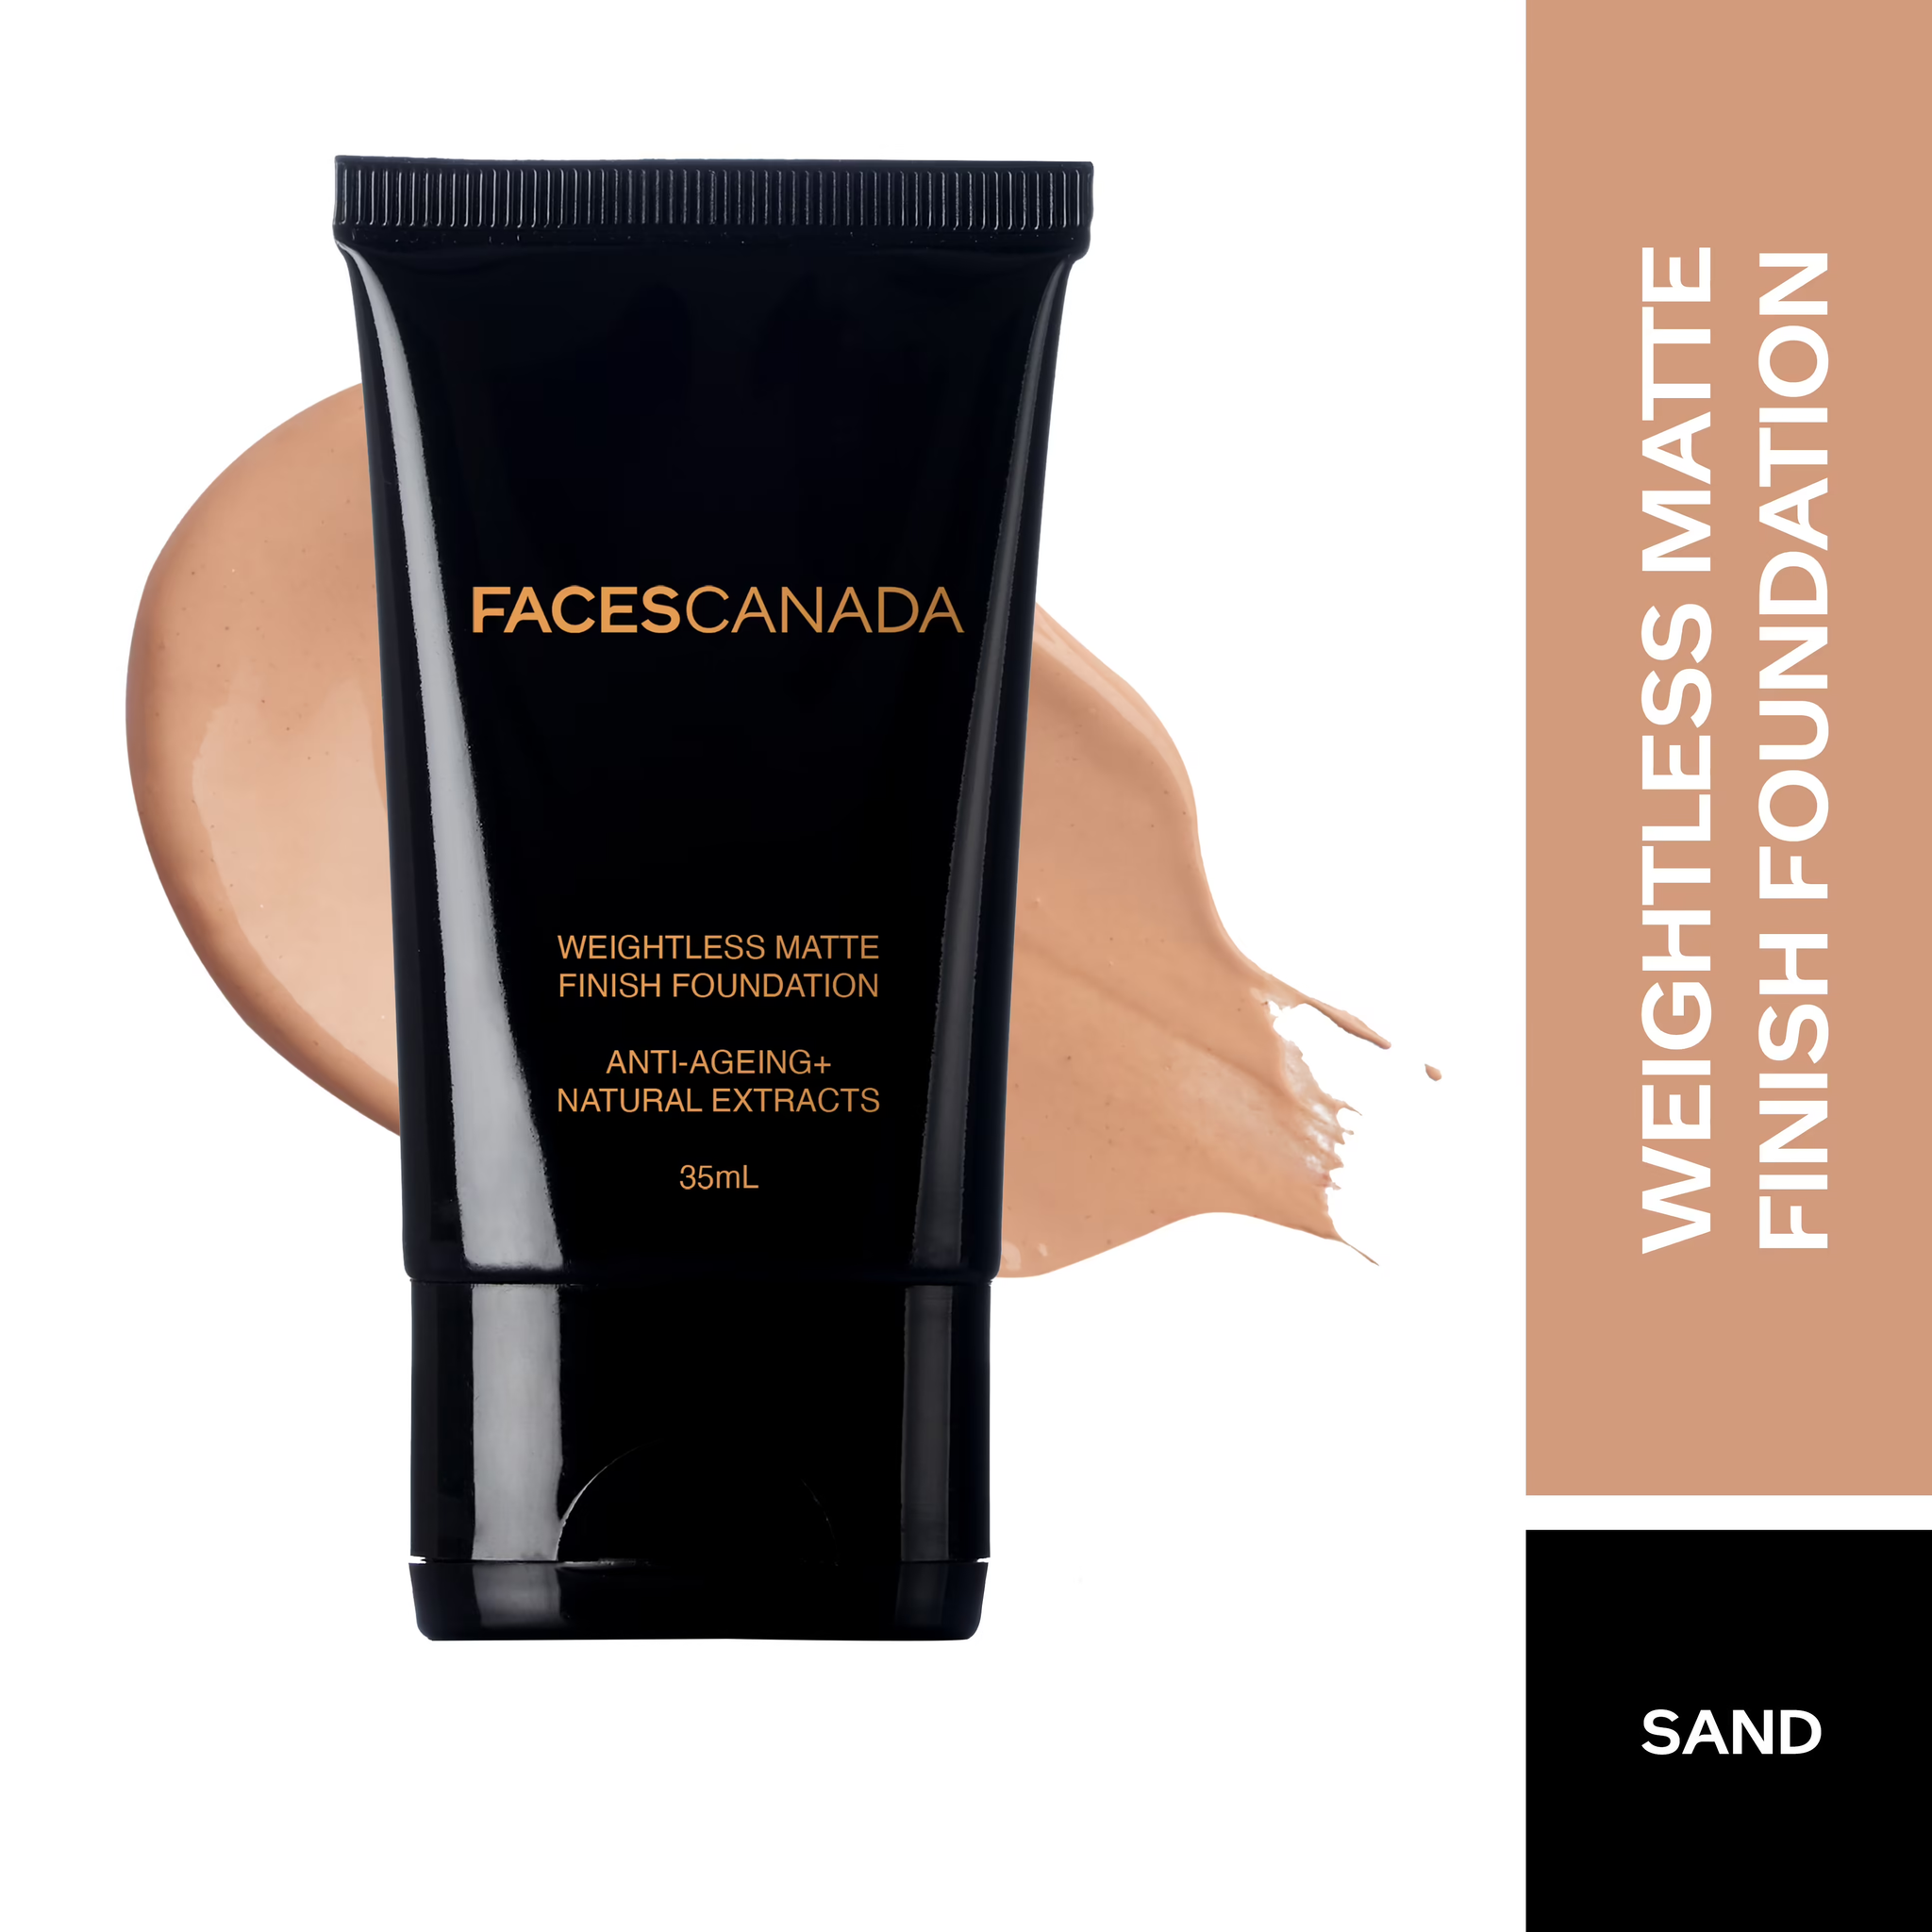 Faces Canada Weightless Matte Finish Foundation-Sand 04, 35 mL